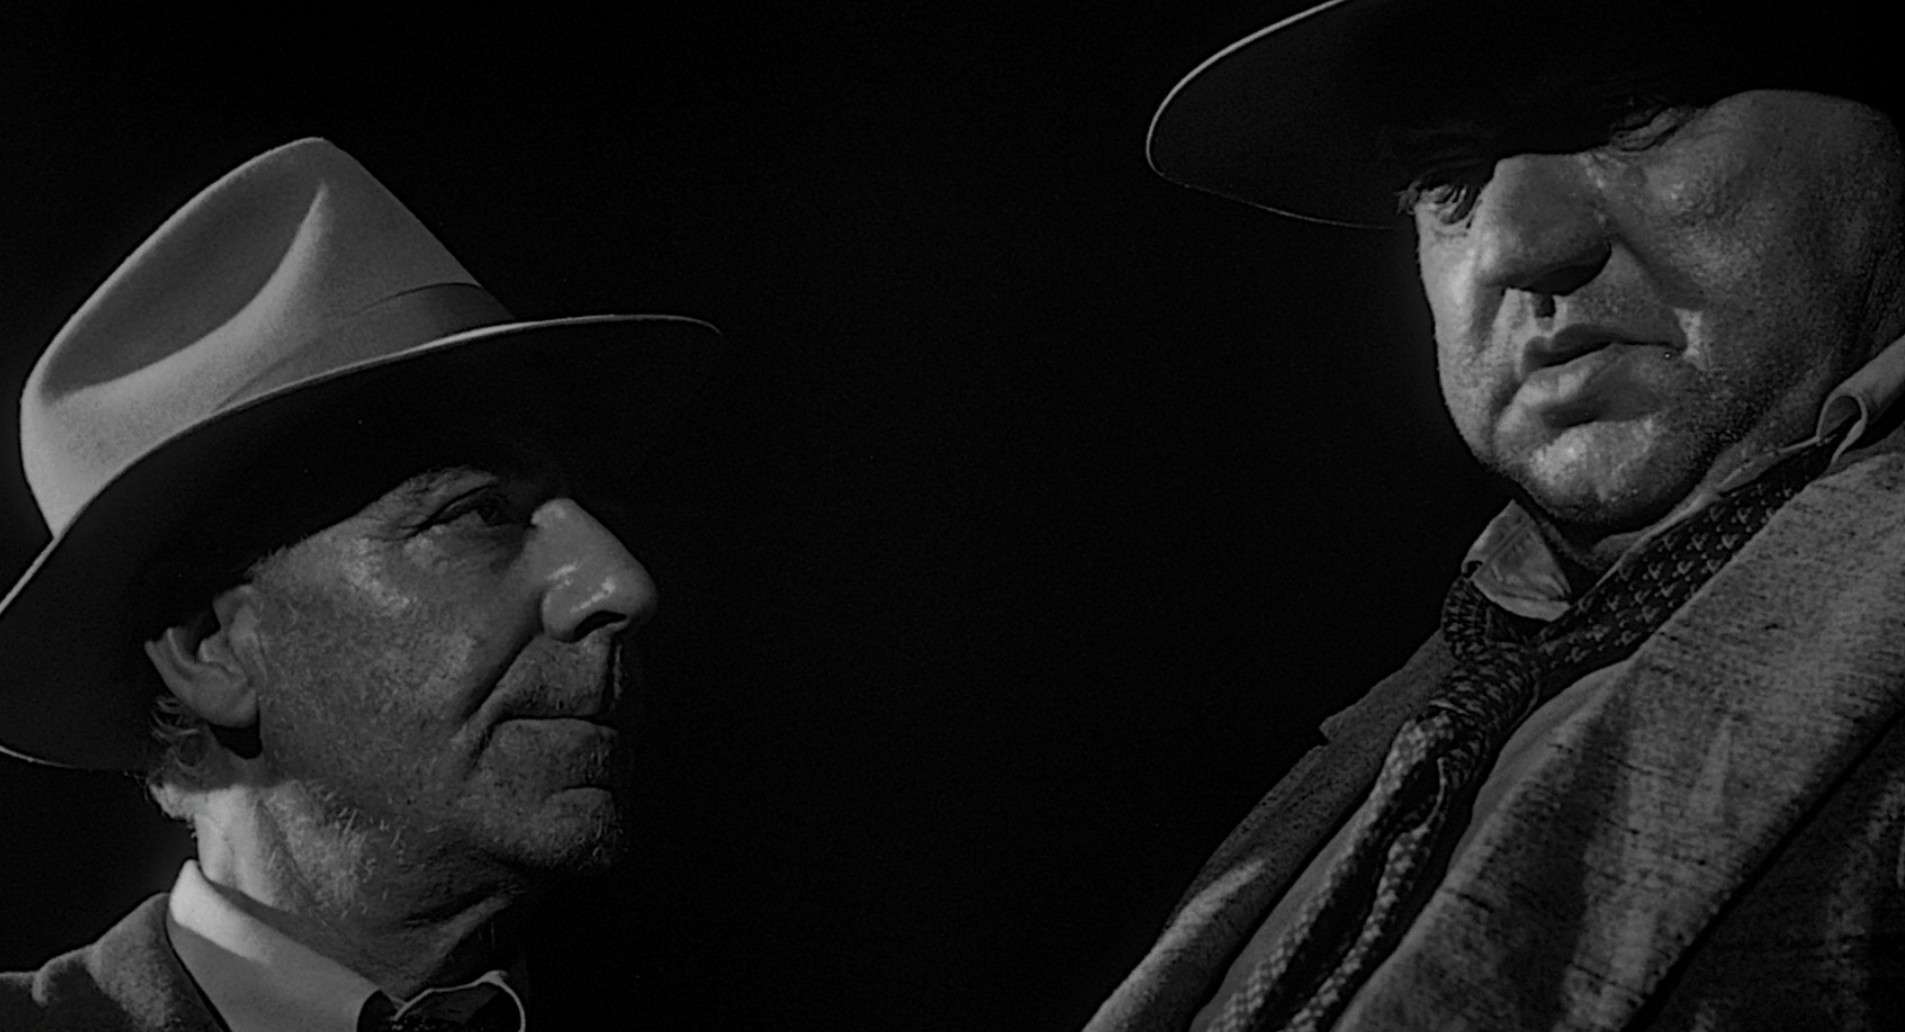 Sgt. Pete Menzies and Capt. Hank Quinlan in Orson Welles' Touch of Evil (1958)